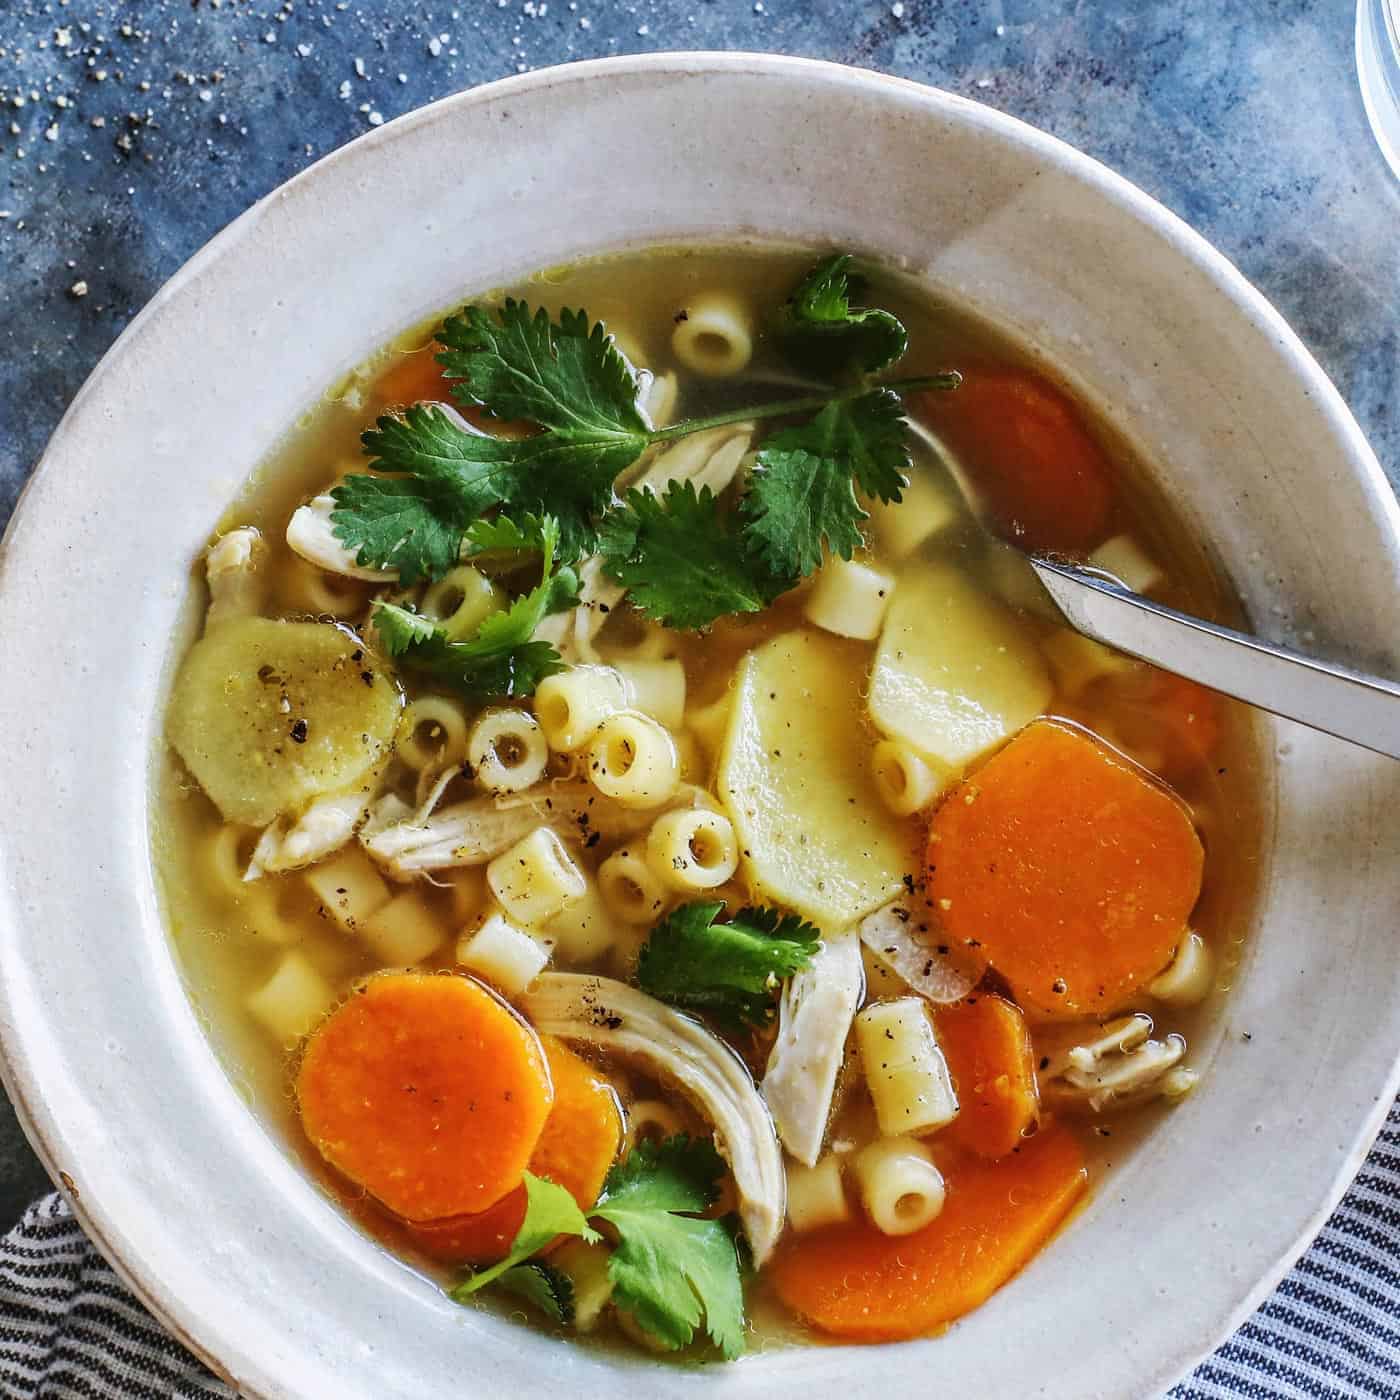 30 Best Homemade Soup Recipes Hungry For Balance - Photos